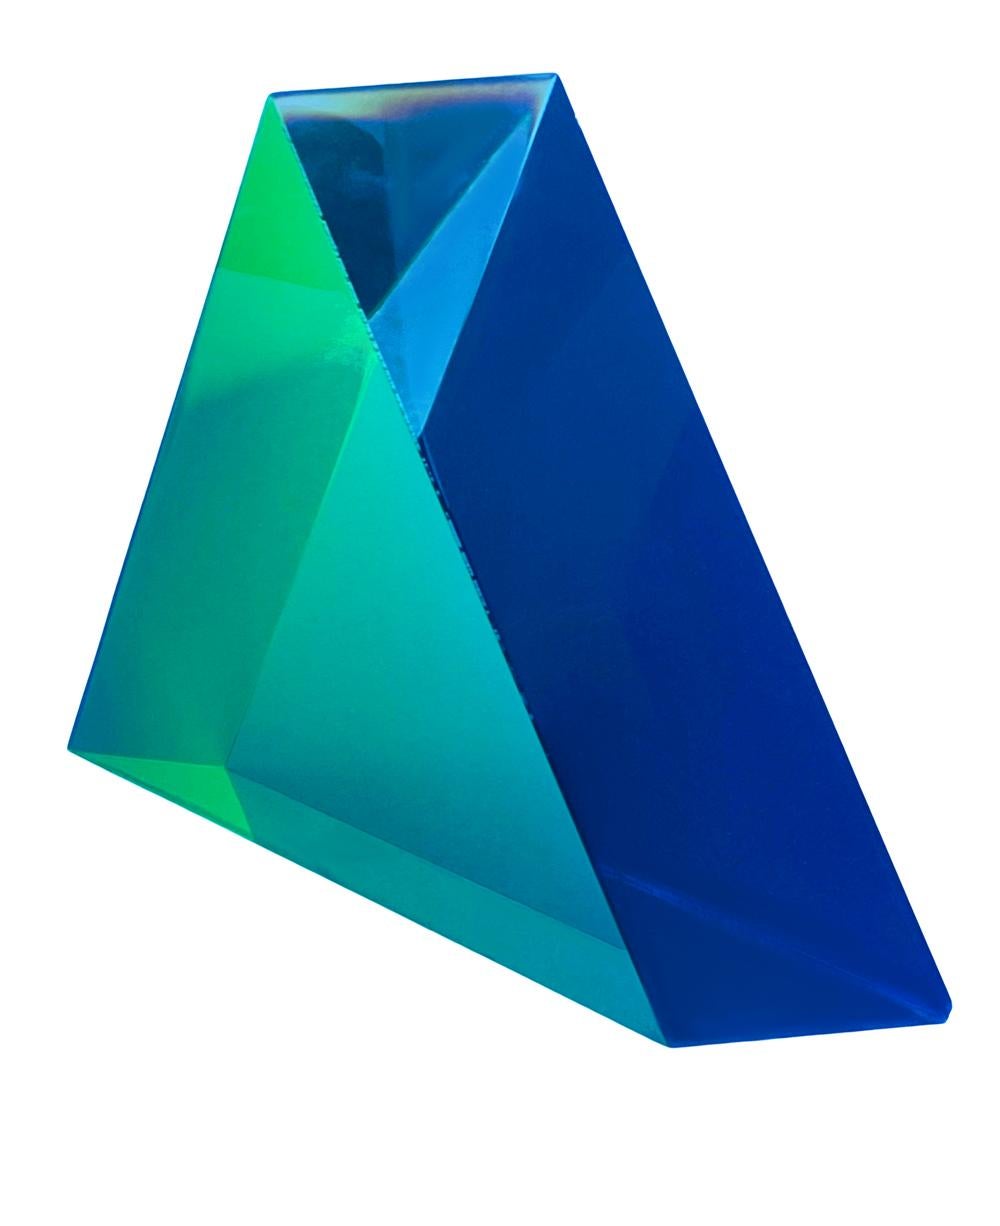 Vasa Mihich Op Art Acrylic Lucite Pyramid Table Sculpture in Blue & Green In Good Condition For Sale In Philadelphia, PA